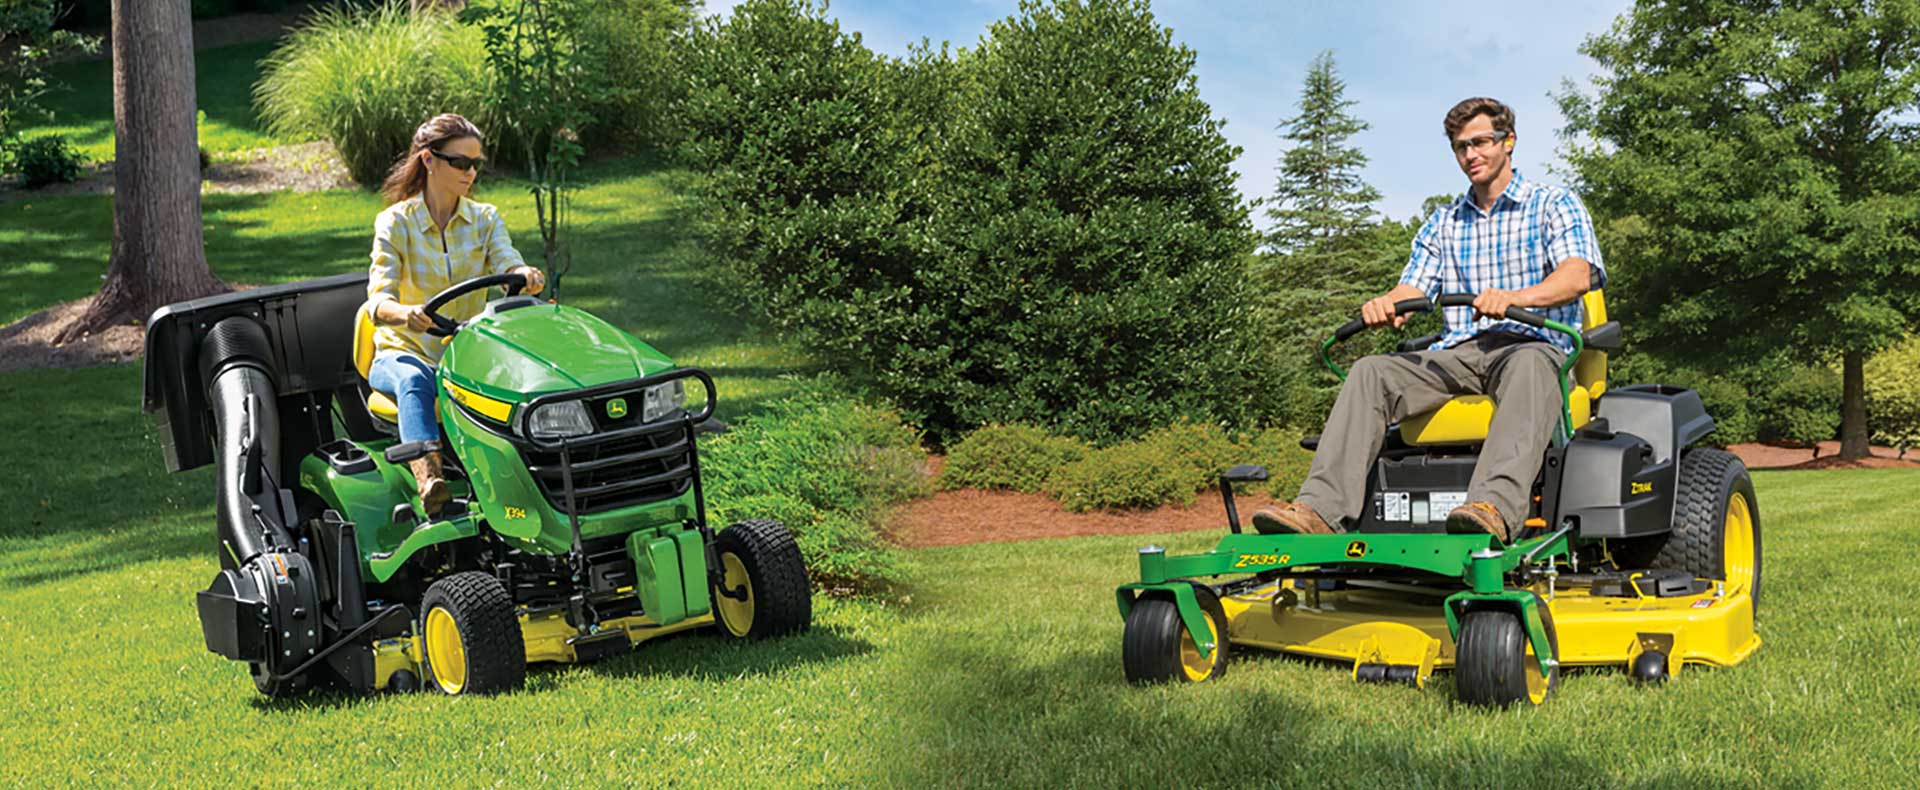 How to Choose a Lawn Mower to Match Your Acreage